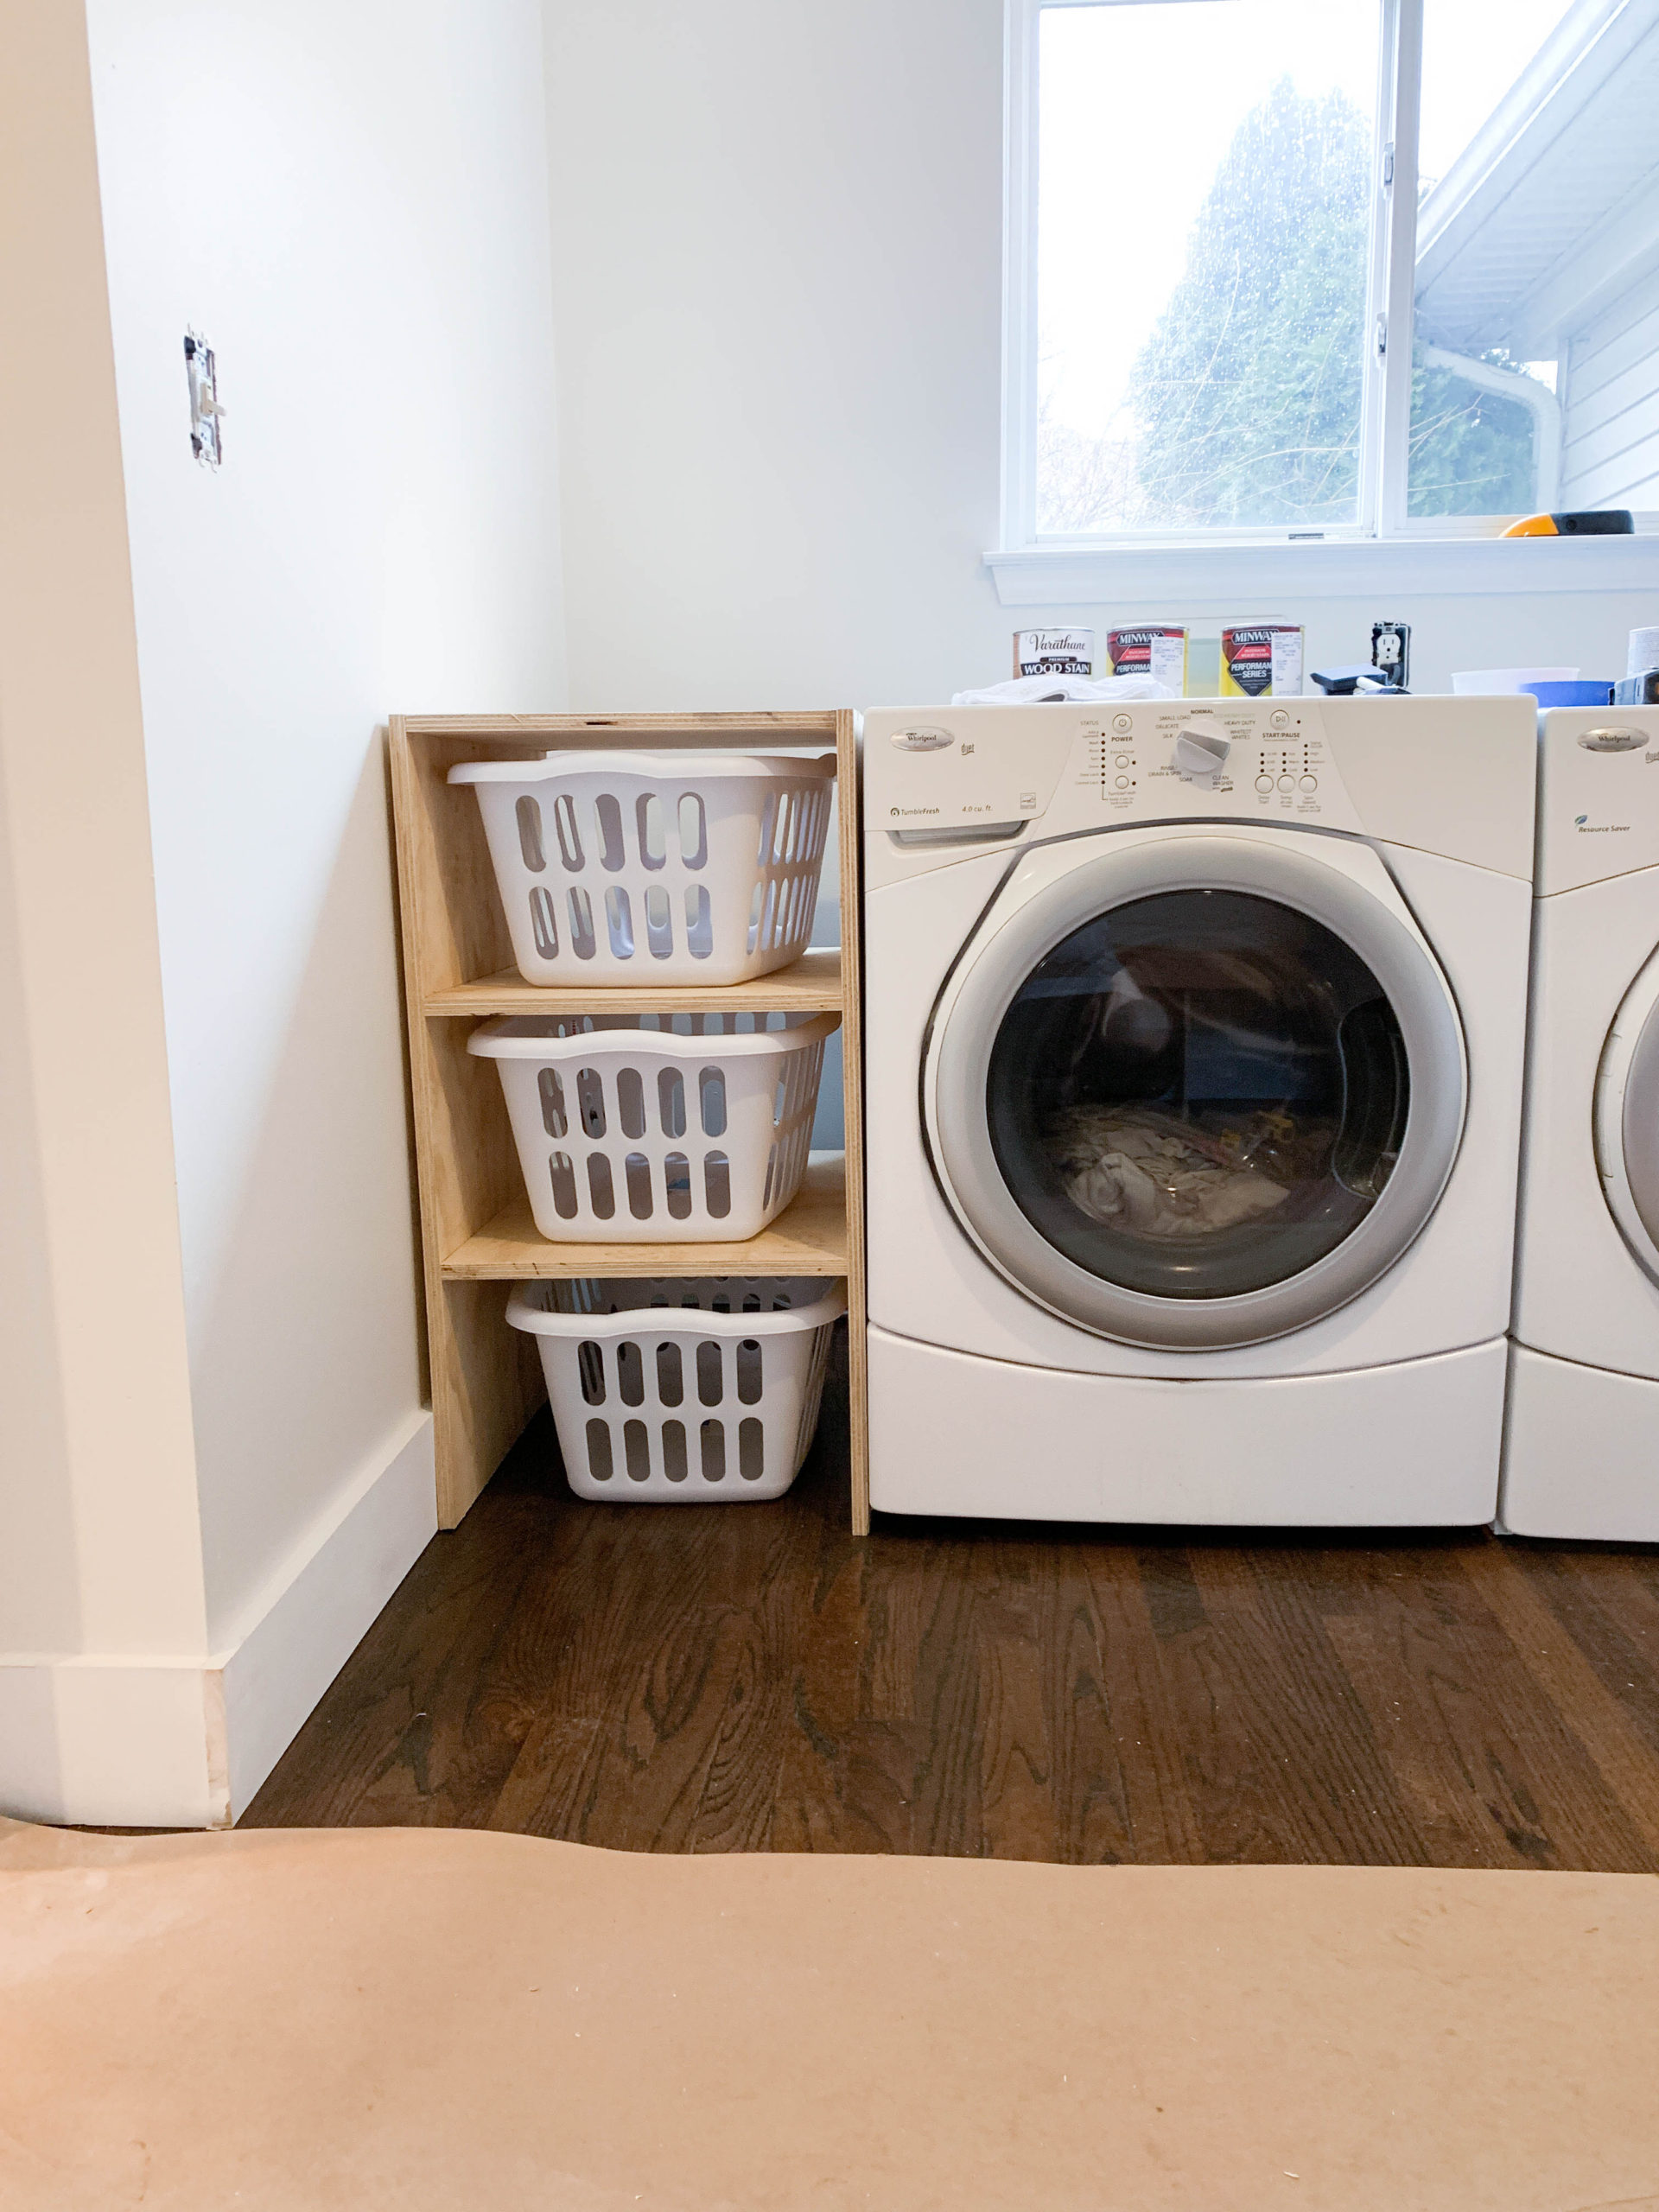 Creating a Pinterest Perfect Laundry Room This 2023 | Clark+Aldine